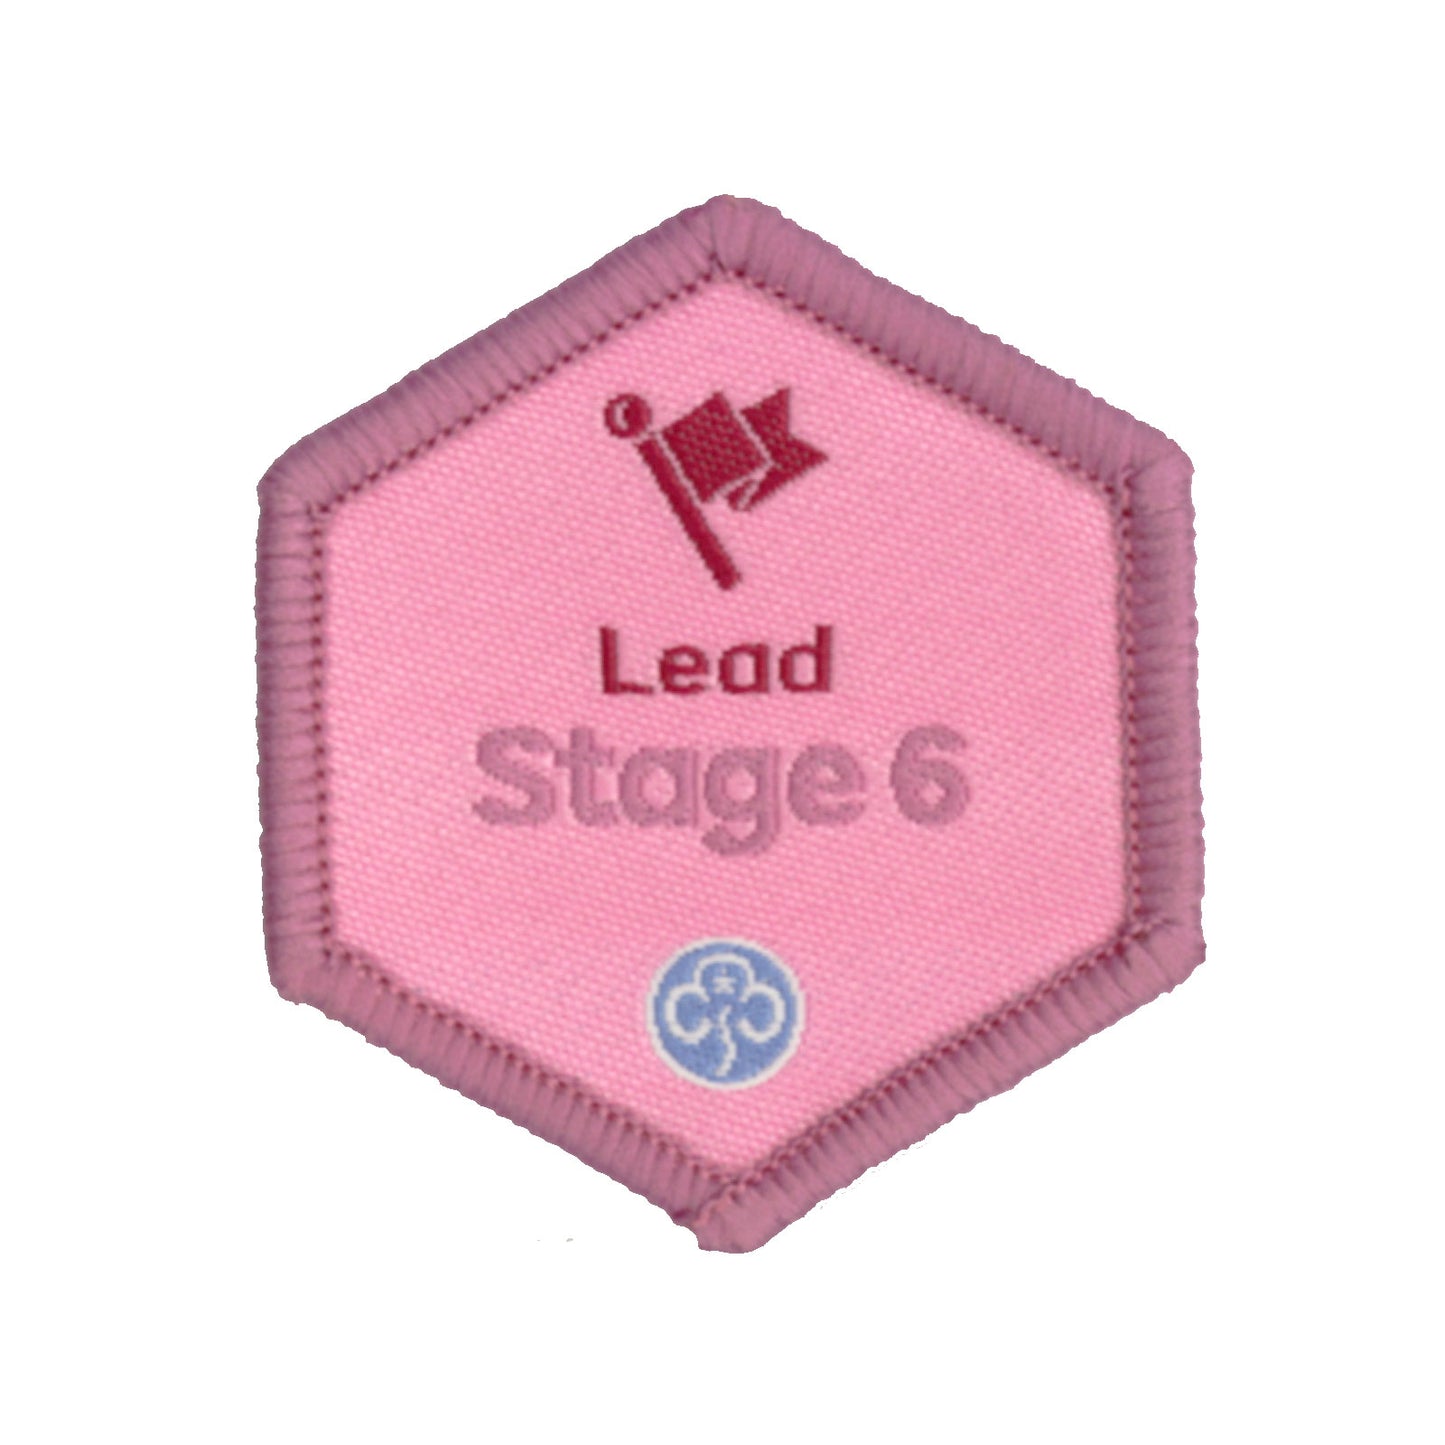 Skills Builder - Skills For My Future - Lead Stage 6 Woven Badge